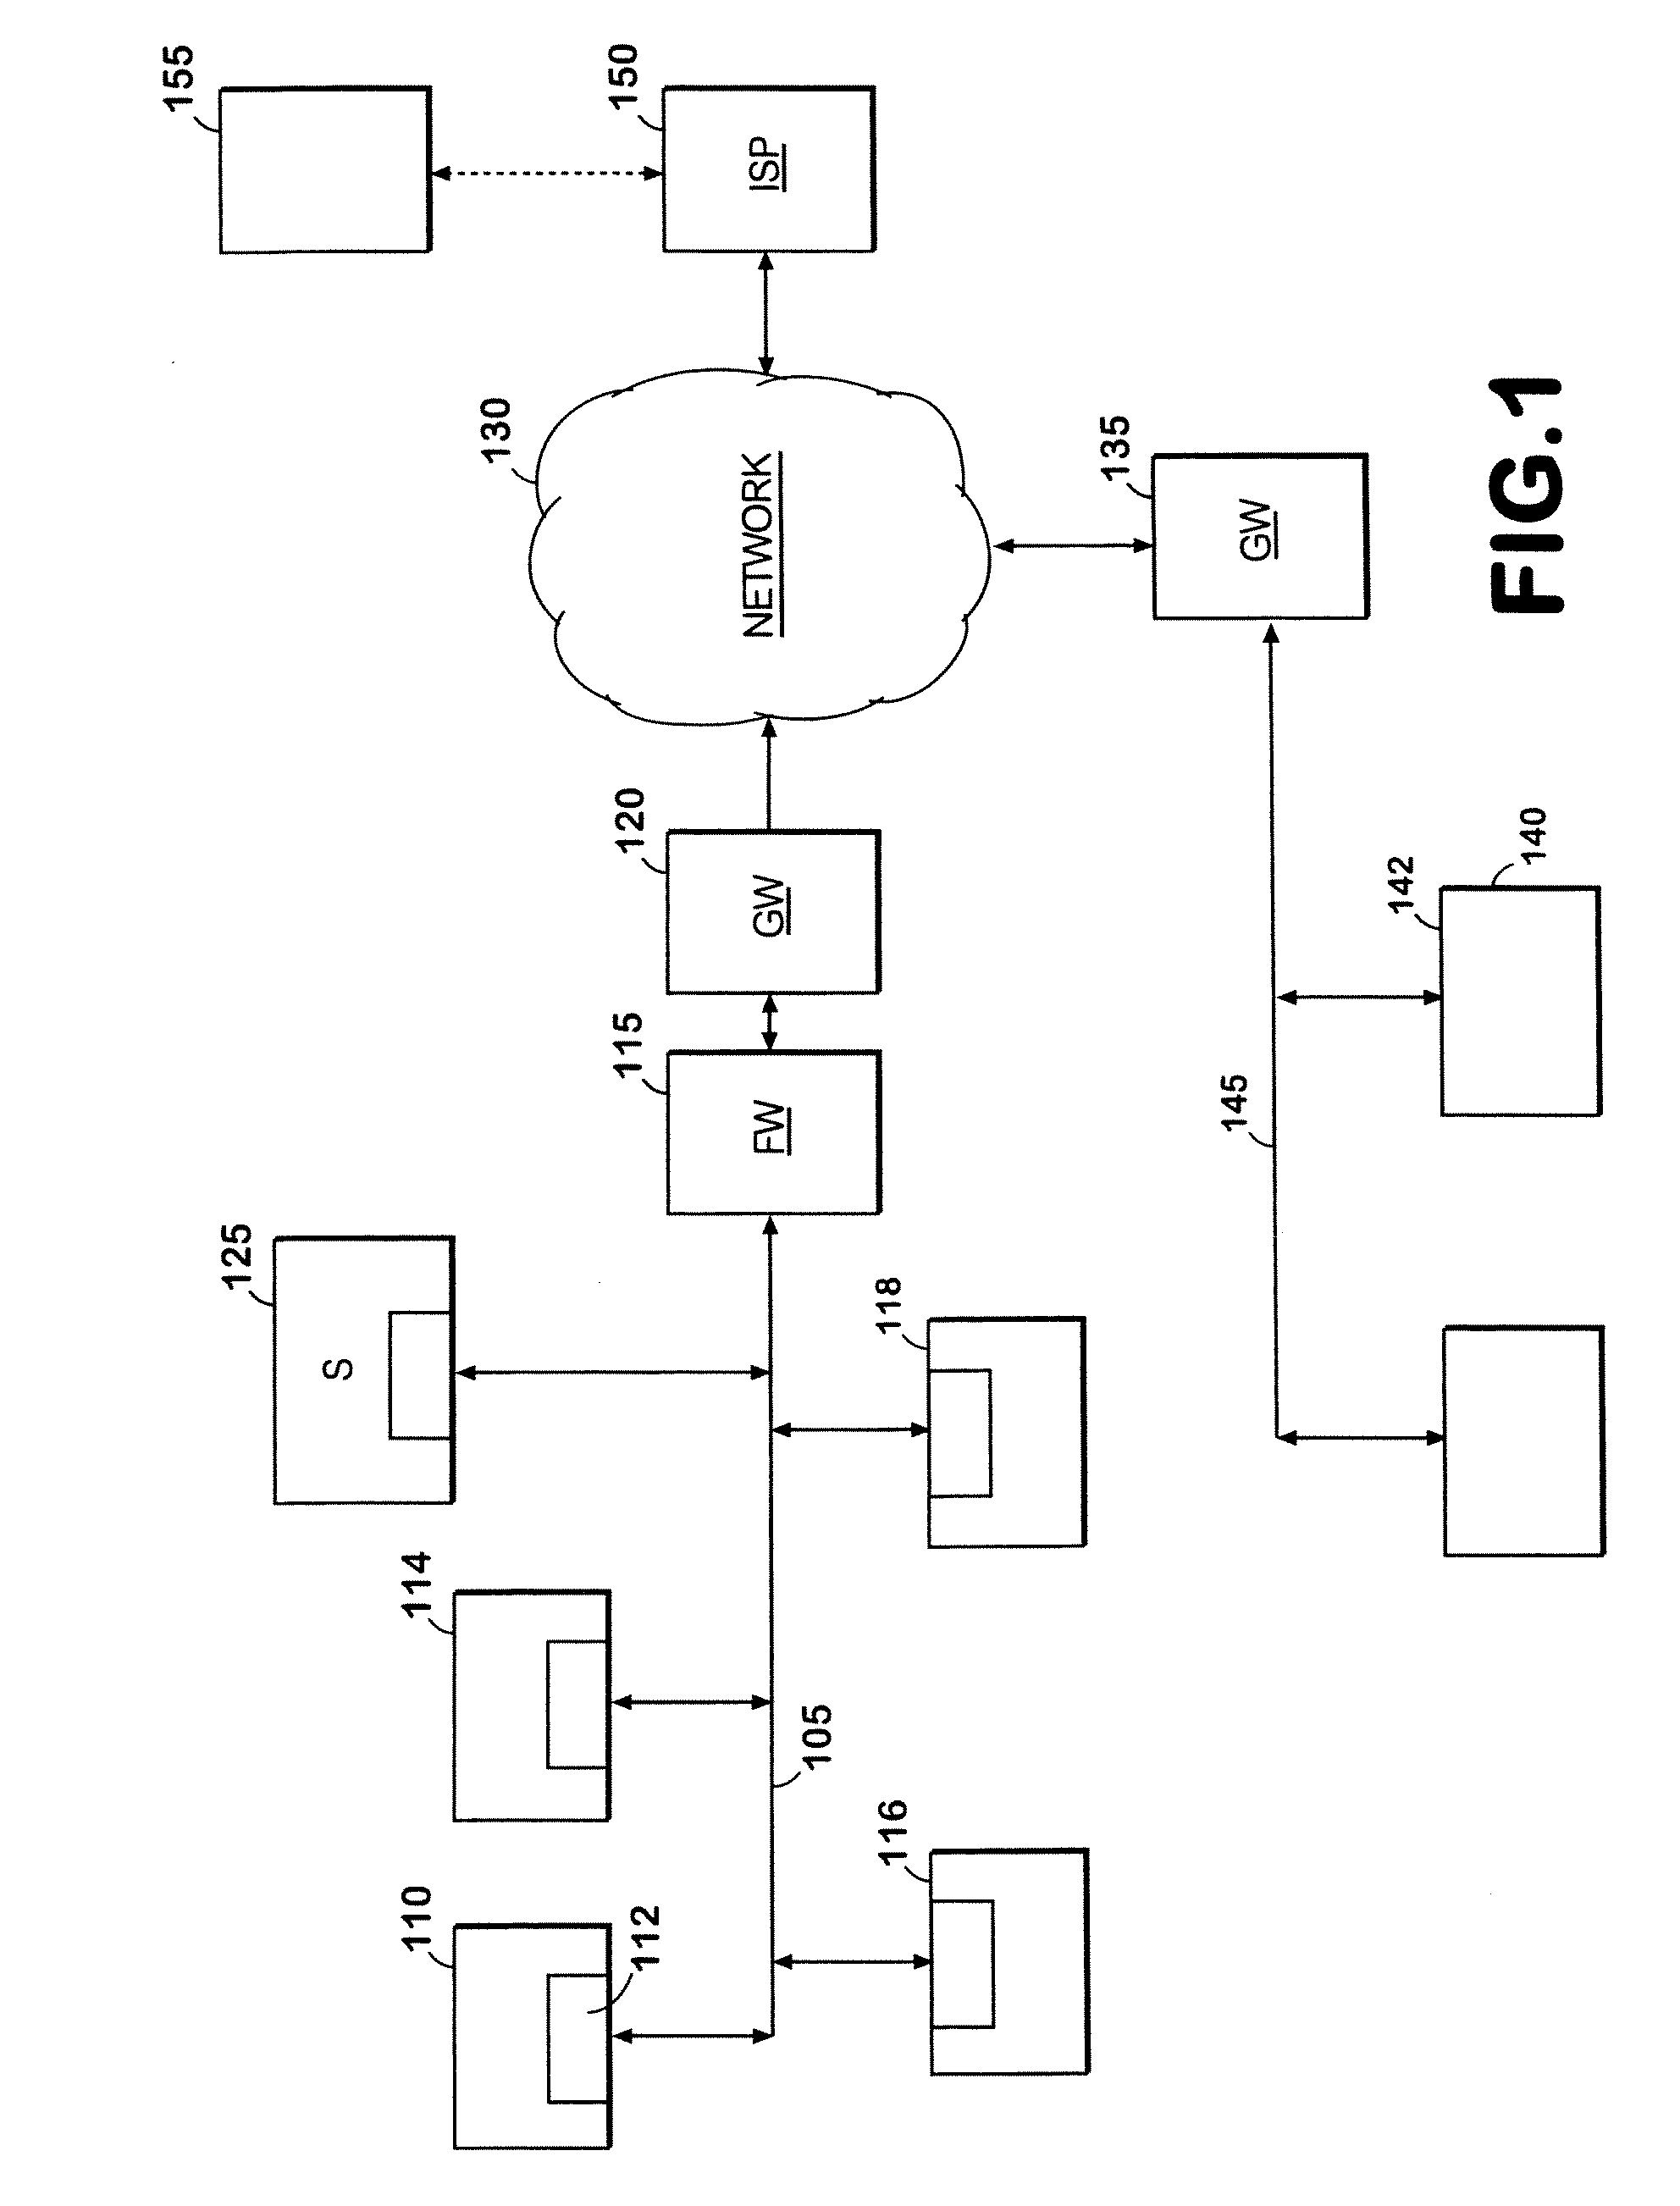 Method and Apparatus for Providing Network and Computer System Security